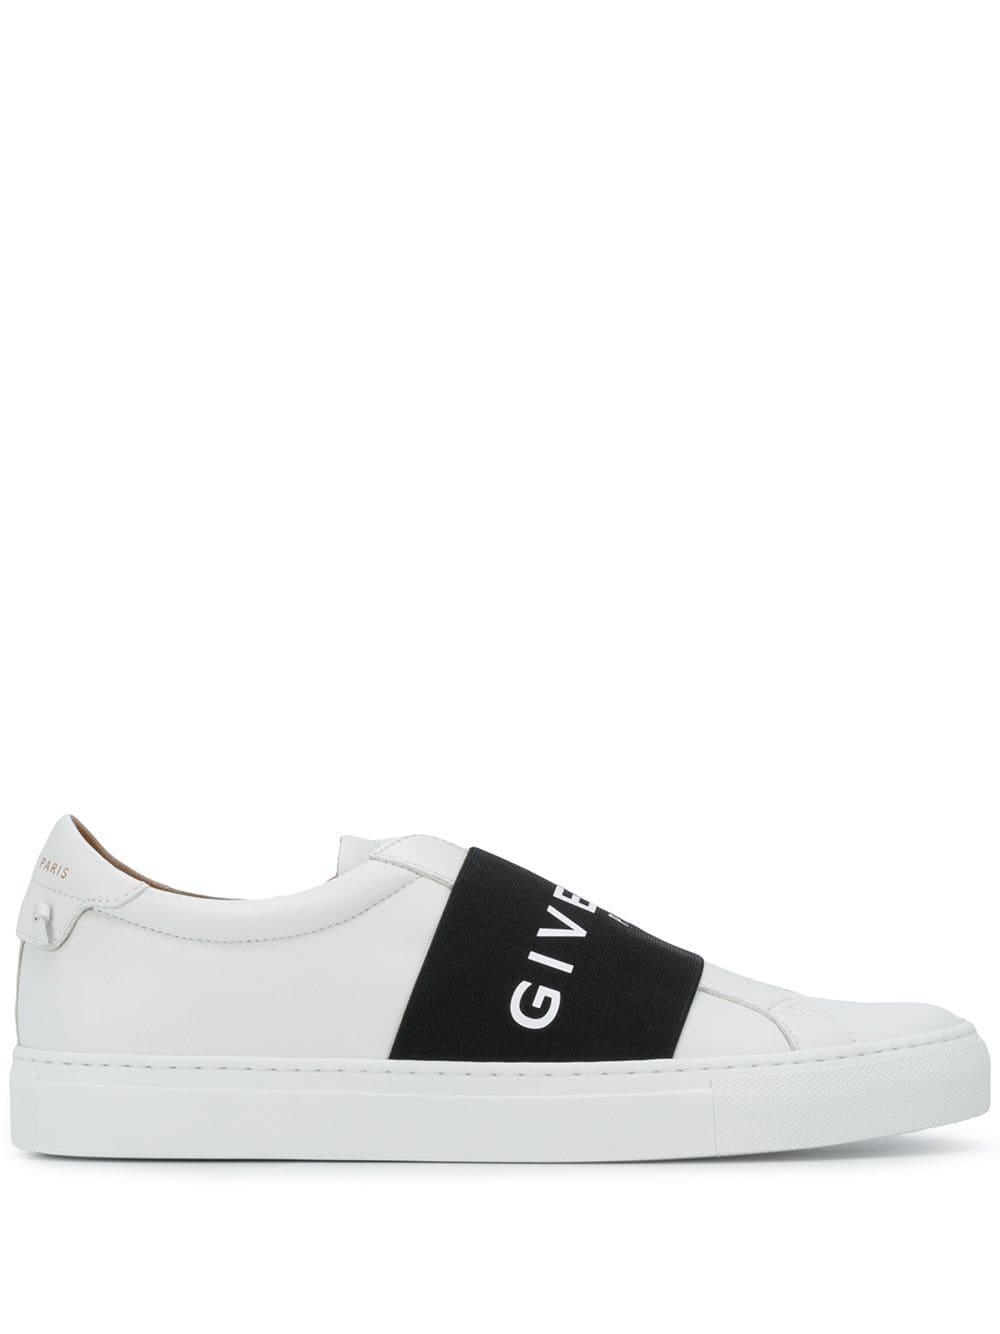 Givenchy Leather Paris Strap Slip-on Sneakers in White for Men - Save ...